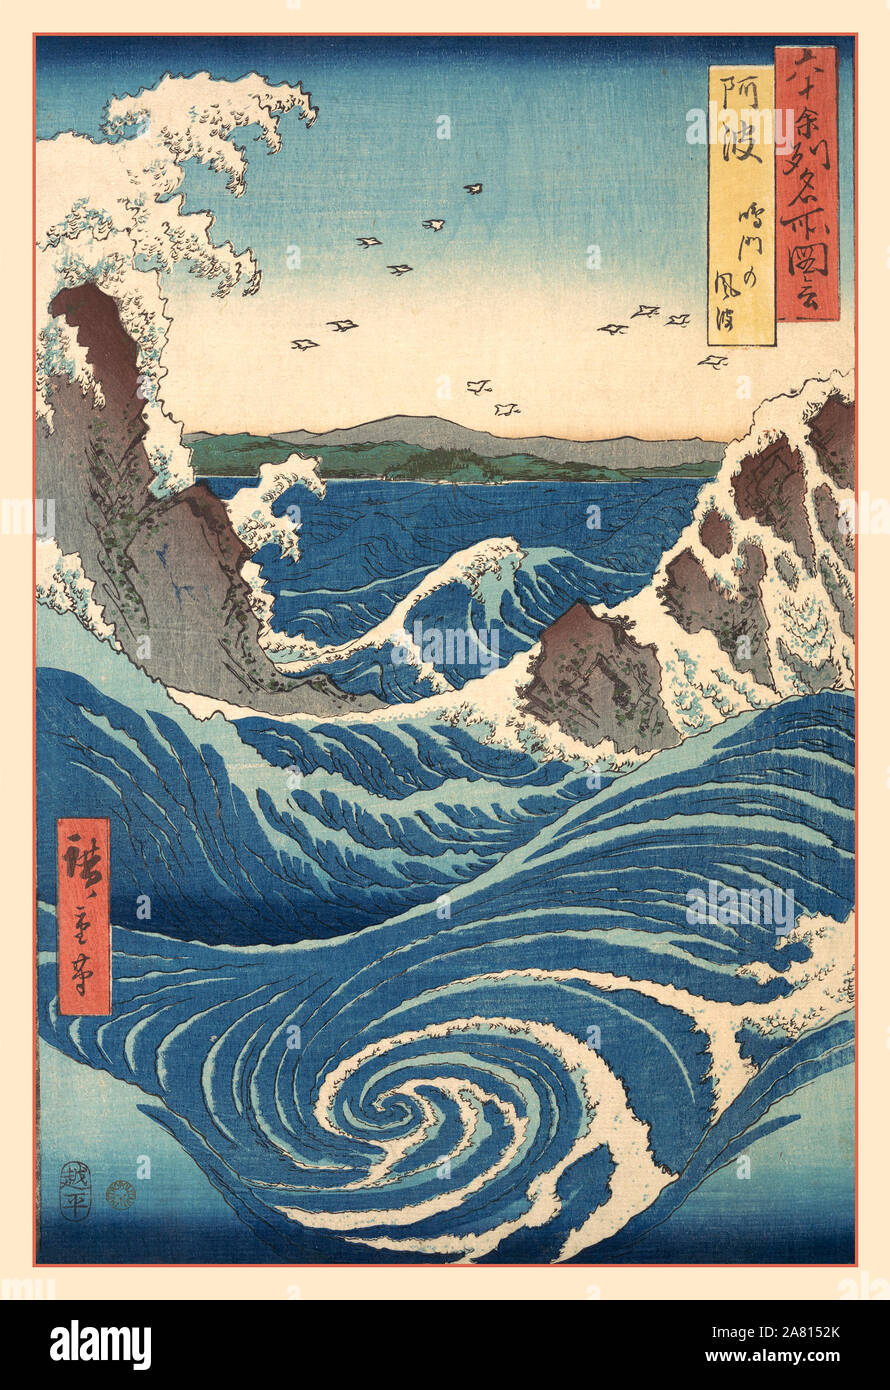 Vintage Illustration Lithograph 'Naruto Whirlpool' Awa Province, from the series 'Views of Famous Places in the Sixty-Odd Provinces' Artist: Utagawa Hiroshige 1853 Famous Views of the Sixty-odd Provinces is a series of ukiyo-e prints by the Japanese artist Hiroshige (1797–1858). The series consists of a print of a famous view from each of the 68 provinces of Japan  The prints were first published in serialized form by Koshimuraya Heisuke in 1853–1856. Stock Photo